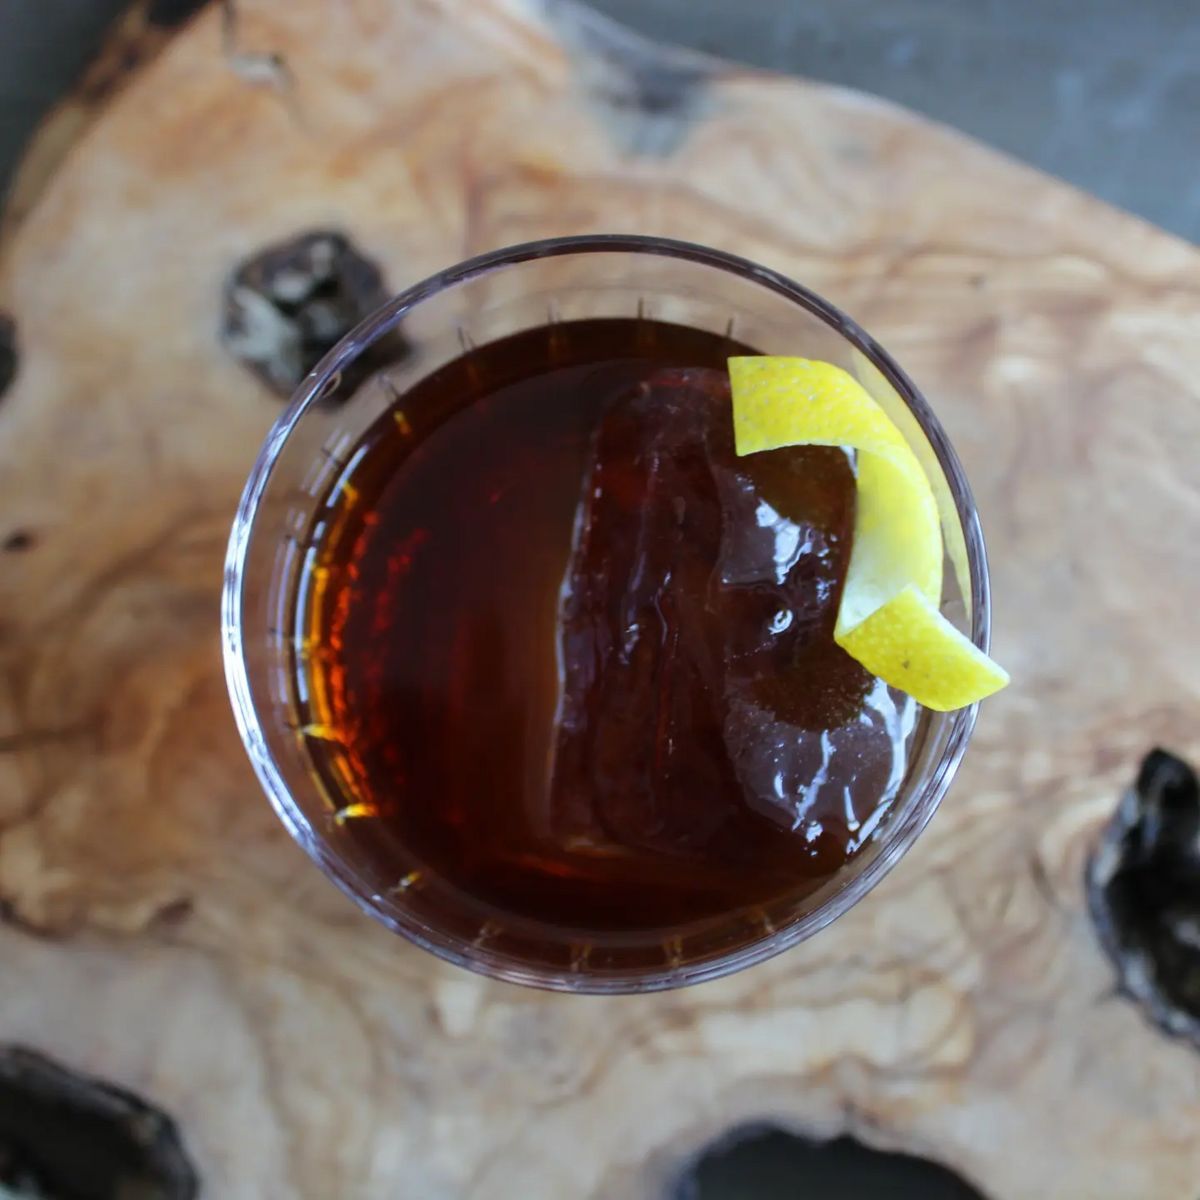 This cocktail is named after the oldest published iced tea recipe from Housekeeping in Old Virginia published in 1877 by Marion Cabell Tyree